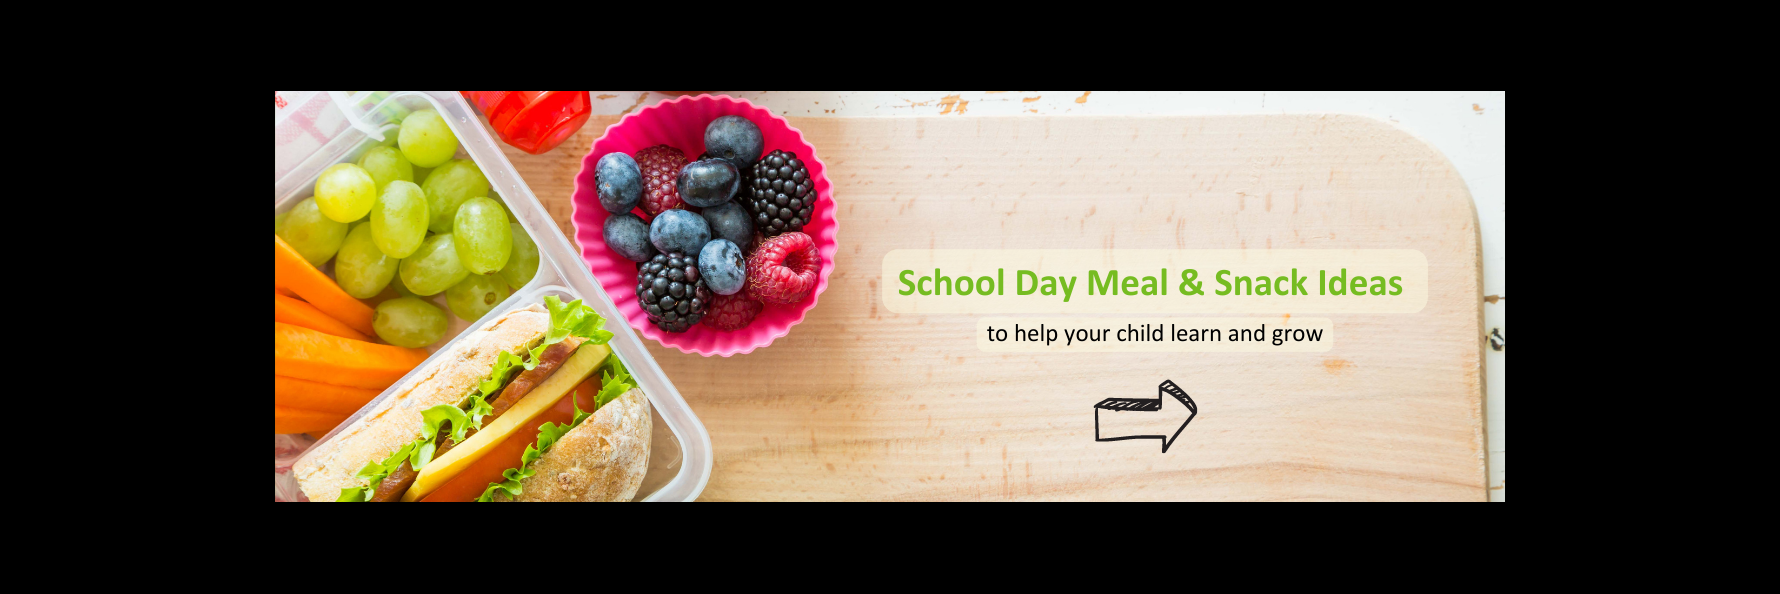 Image of lunch and snacks in containers. Text: School Day Meal and Snack Ideas to help your child learn and grow.